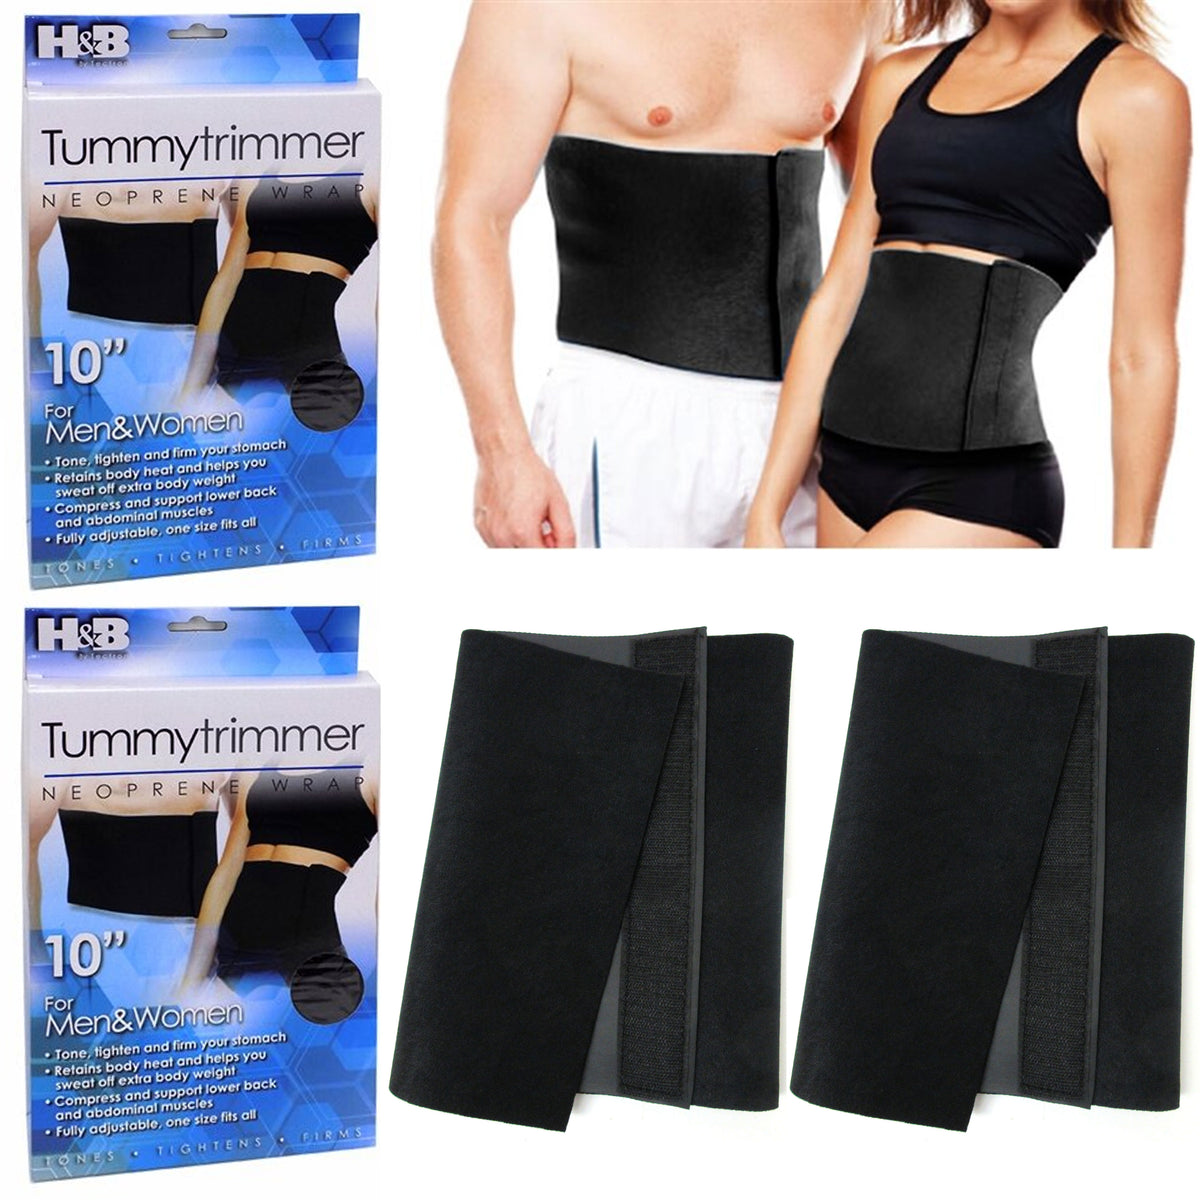 Women's Slimming Tummy Wrap Belt in Central Division - Tools